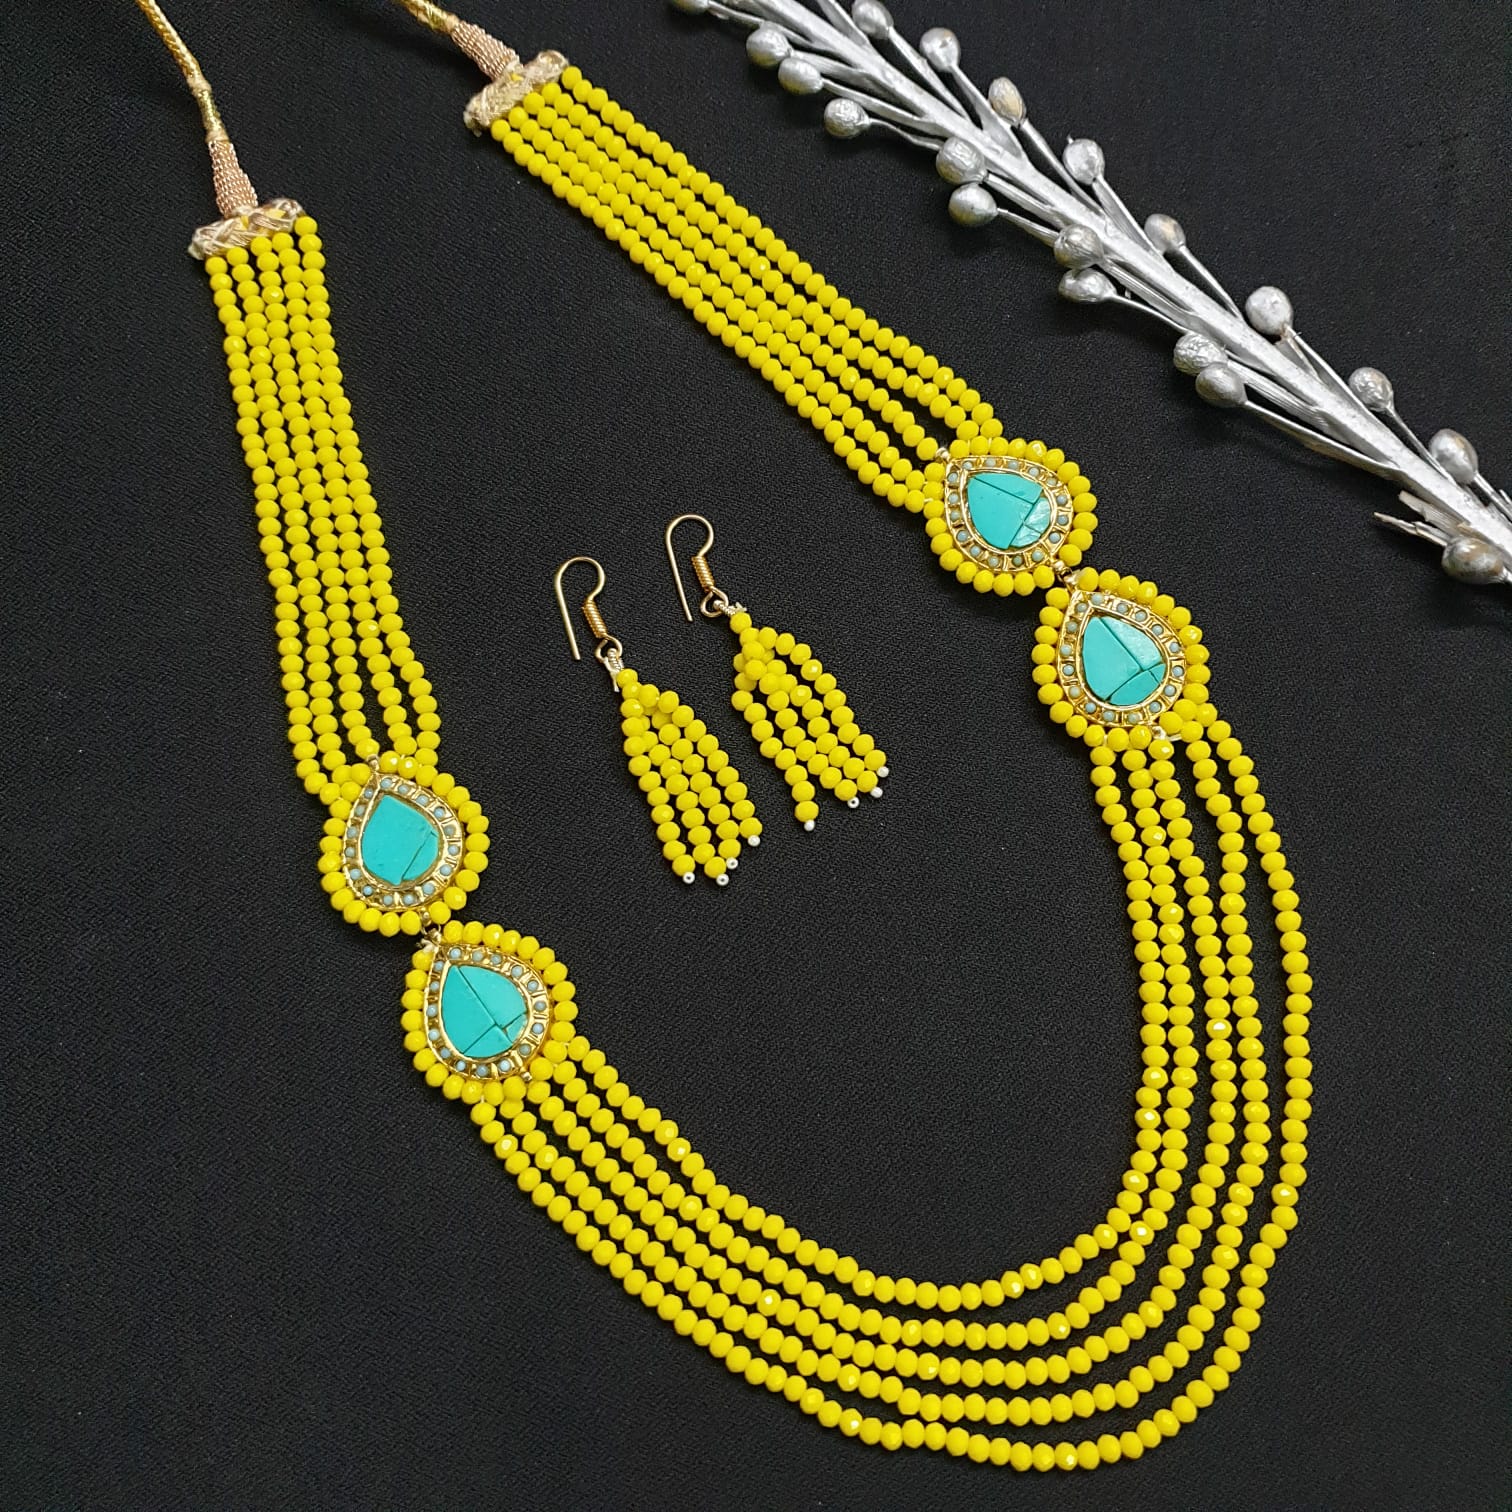 Unique Yellow Turquoise Beaded Necklace With Earrings